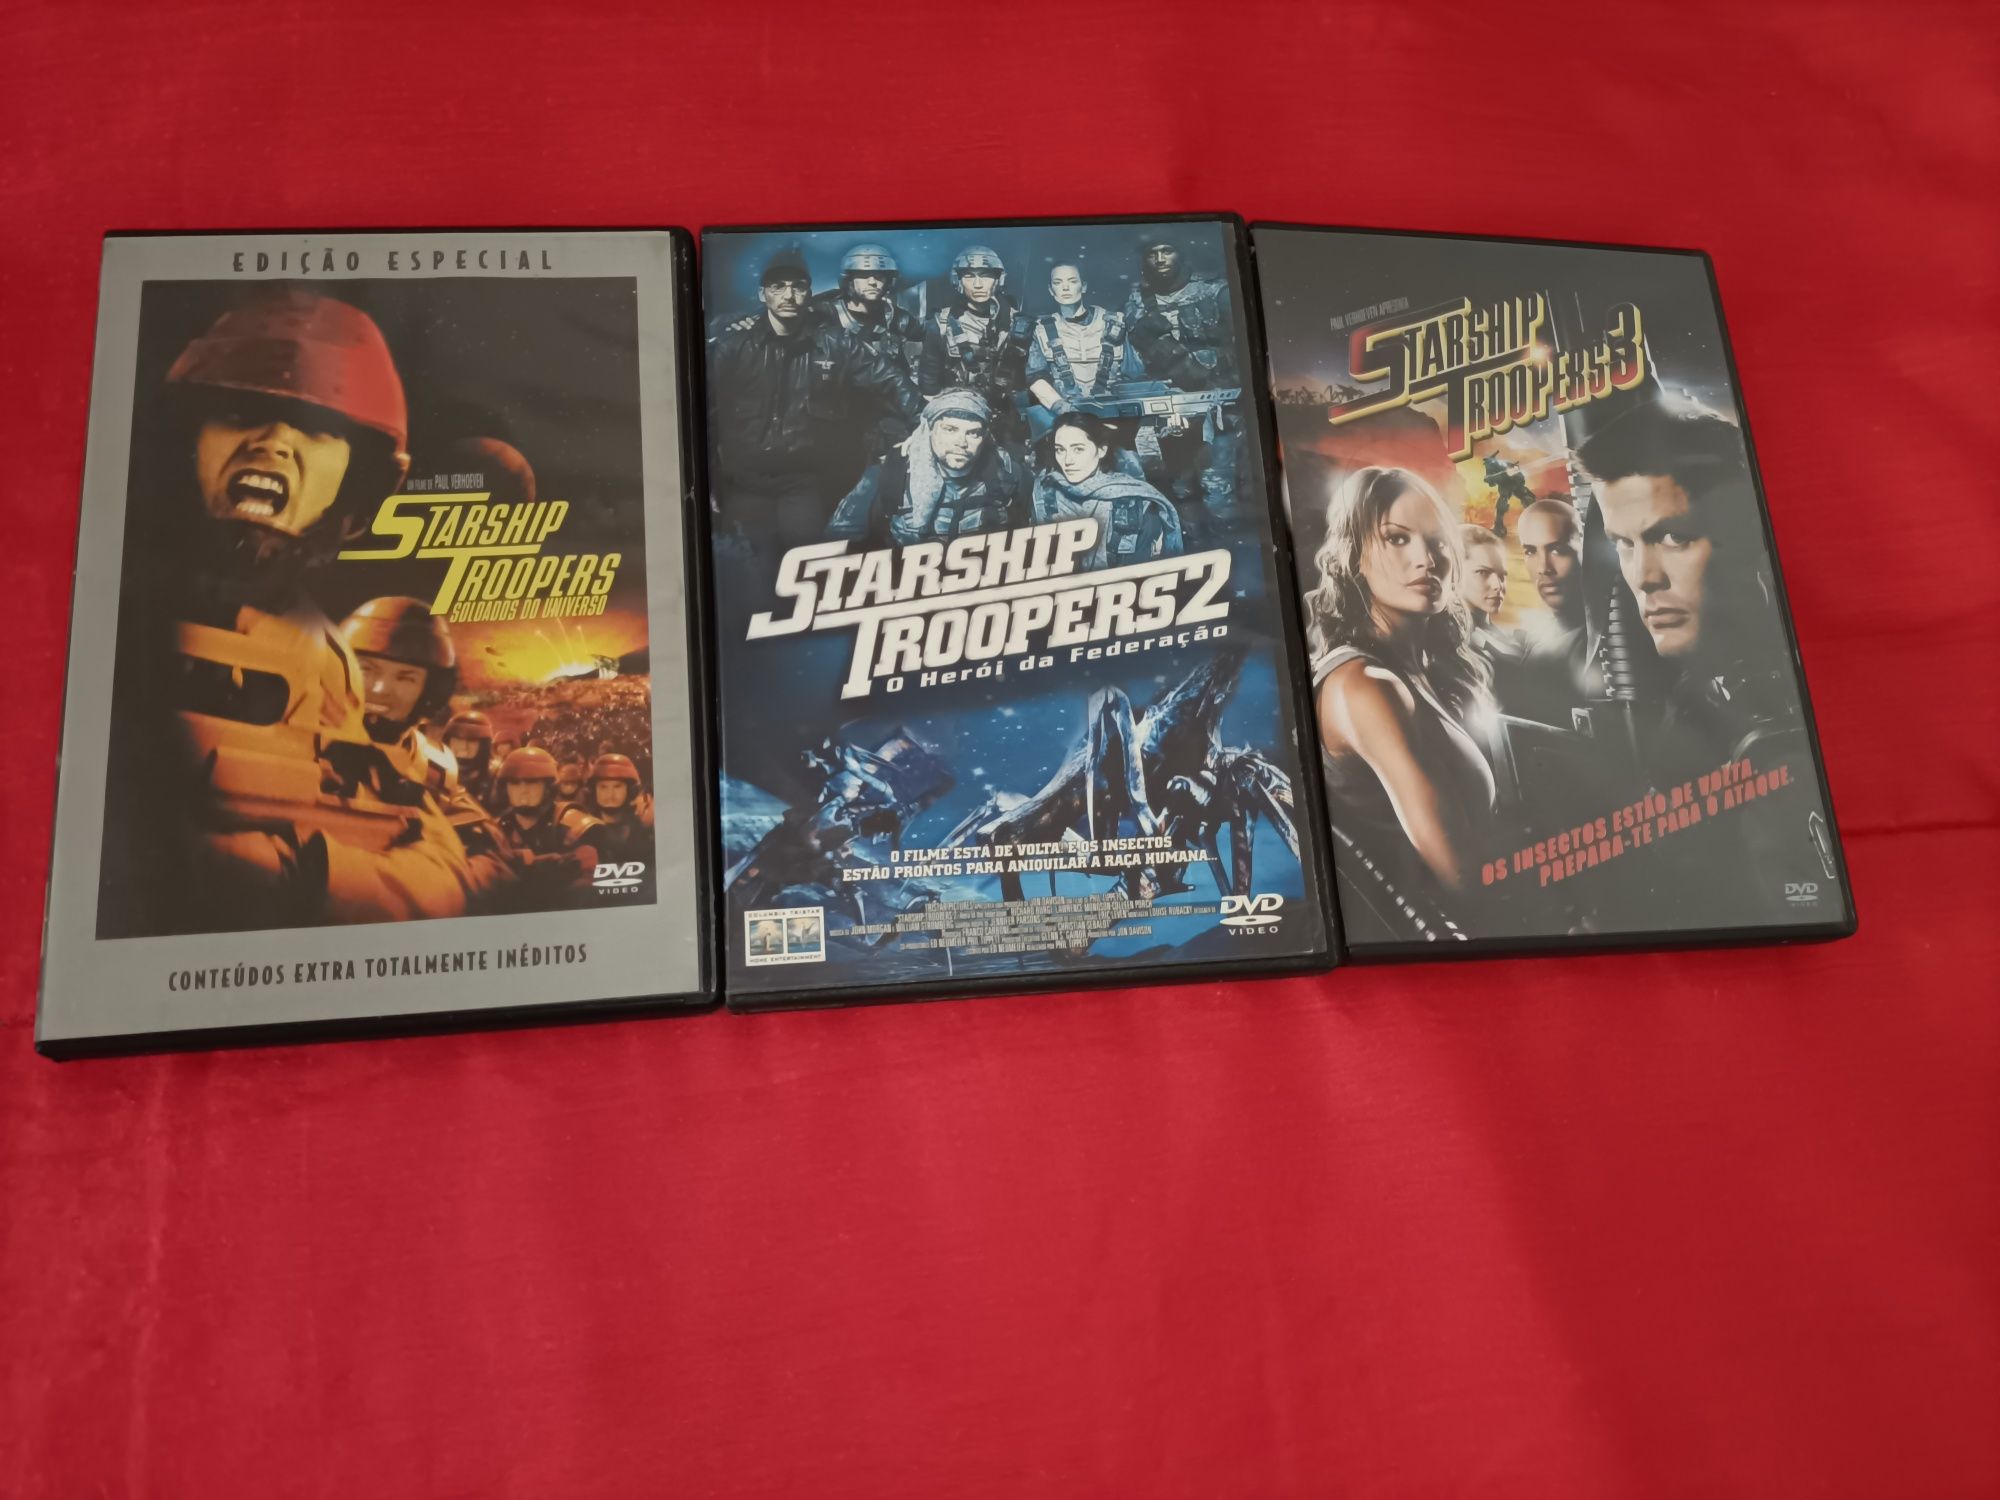 Starship Troopers_trilogia